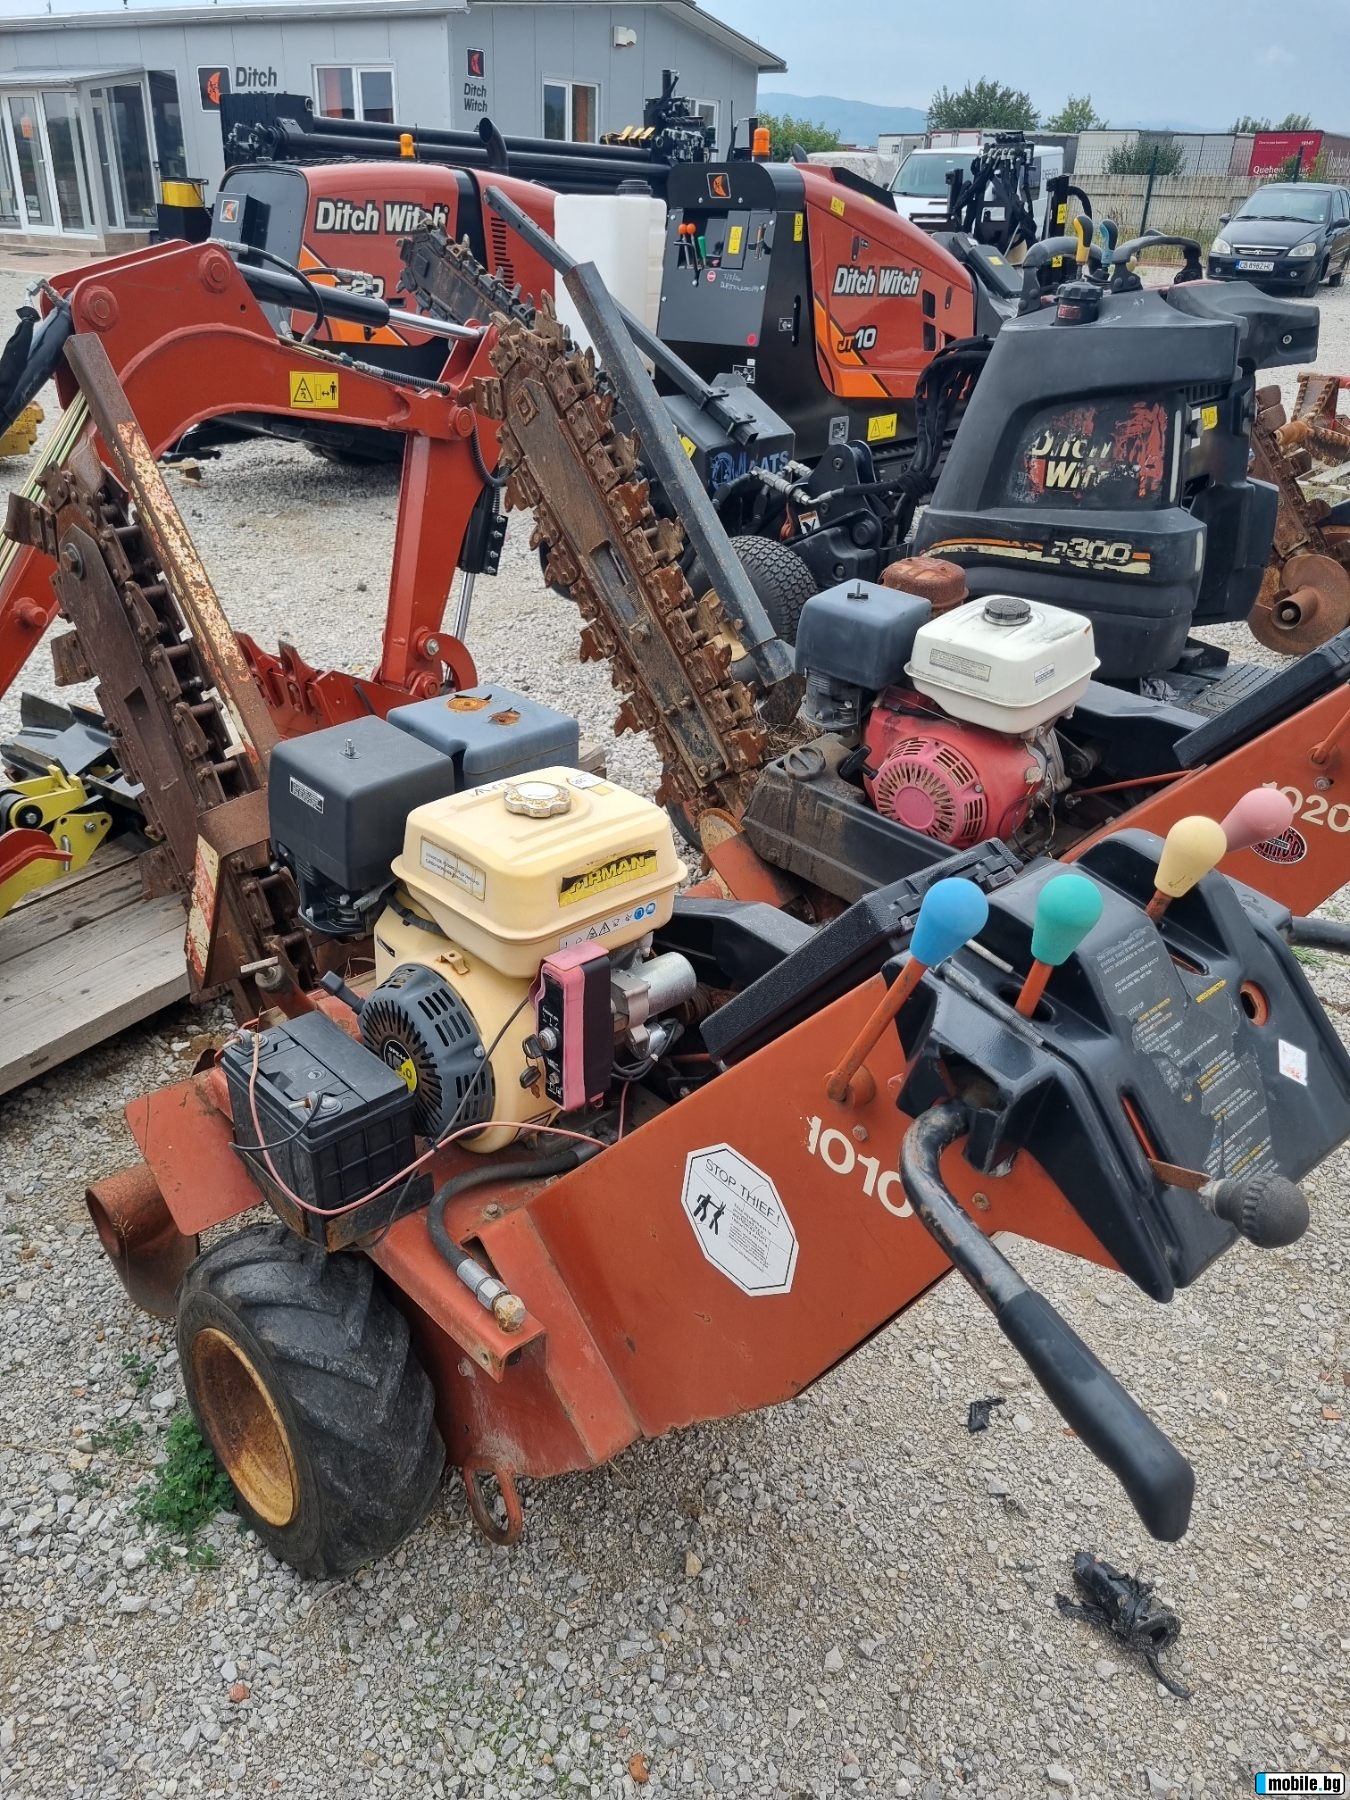  Ditch Witch 1020 | Mobile.bg   2